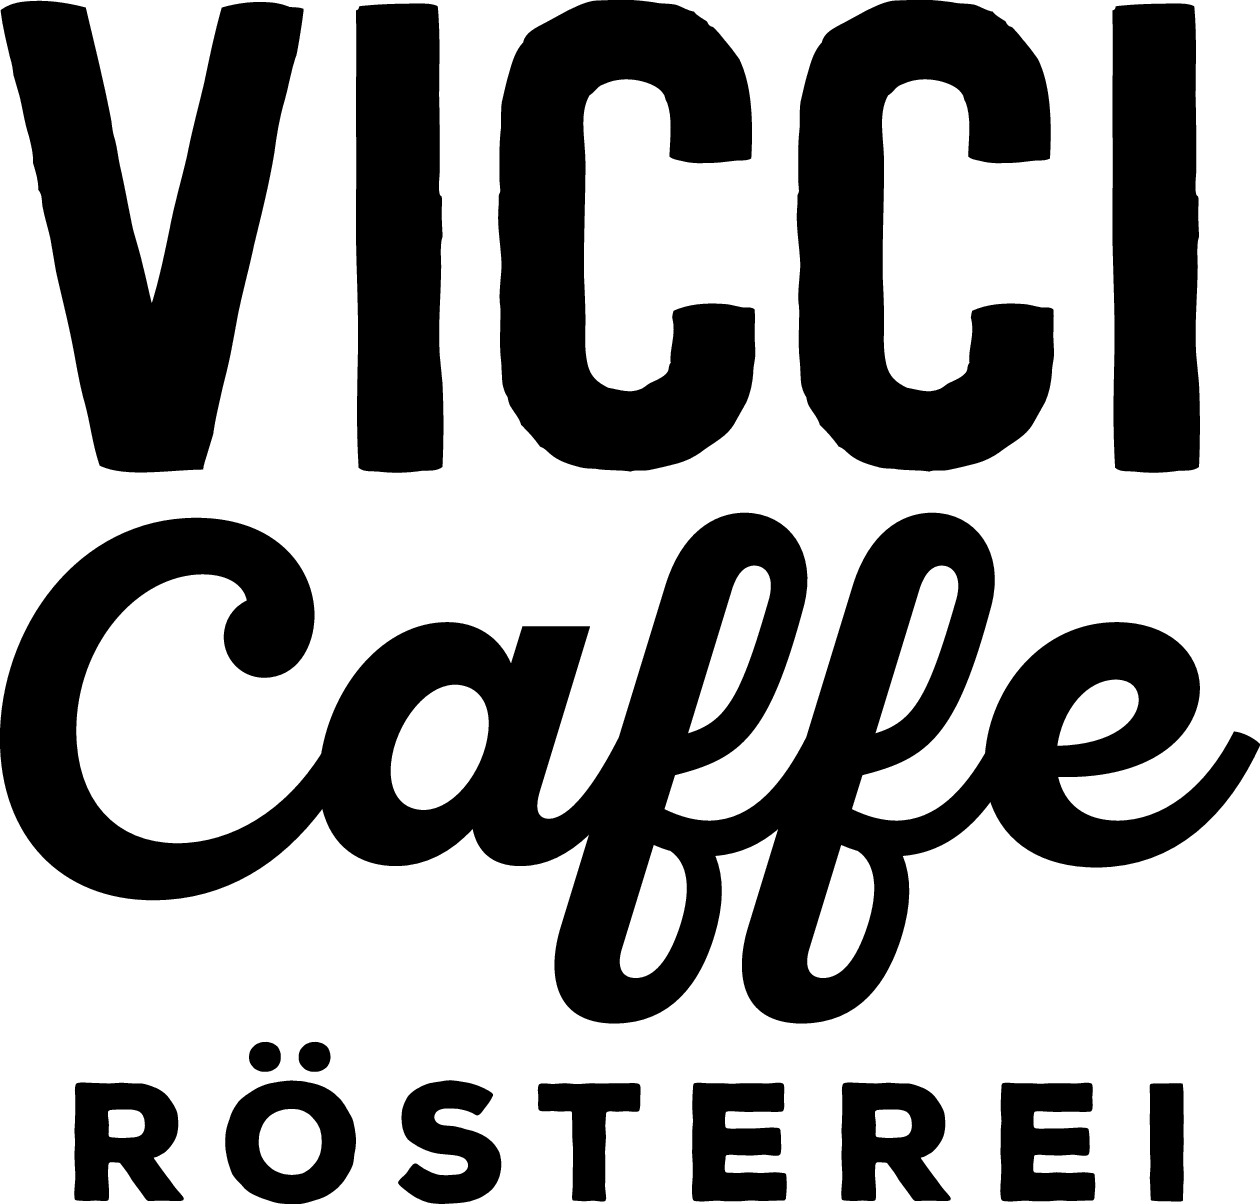 Vicci Caffe Rösterei GmbH & Co. KG Am Hasselt 15 24576 Bad Bramstedt